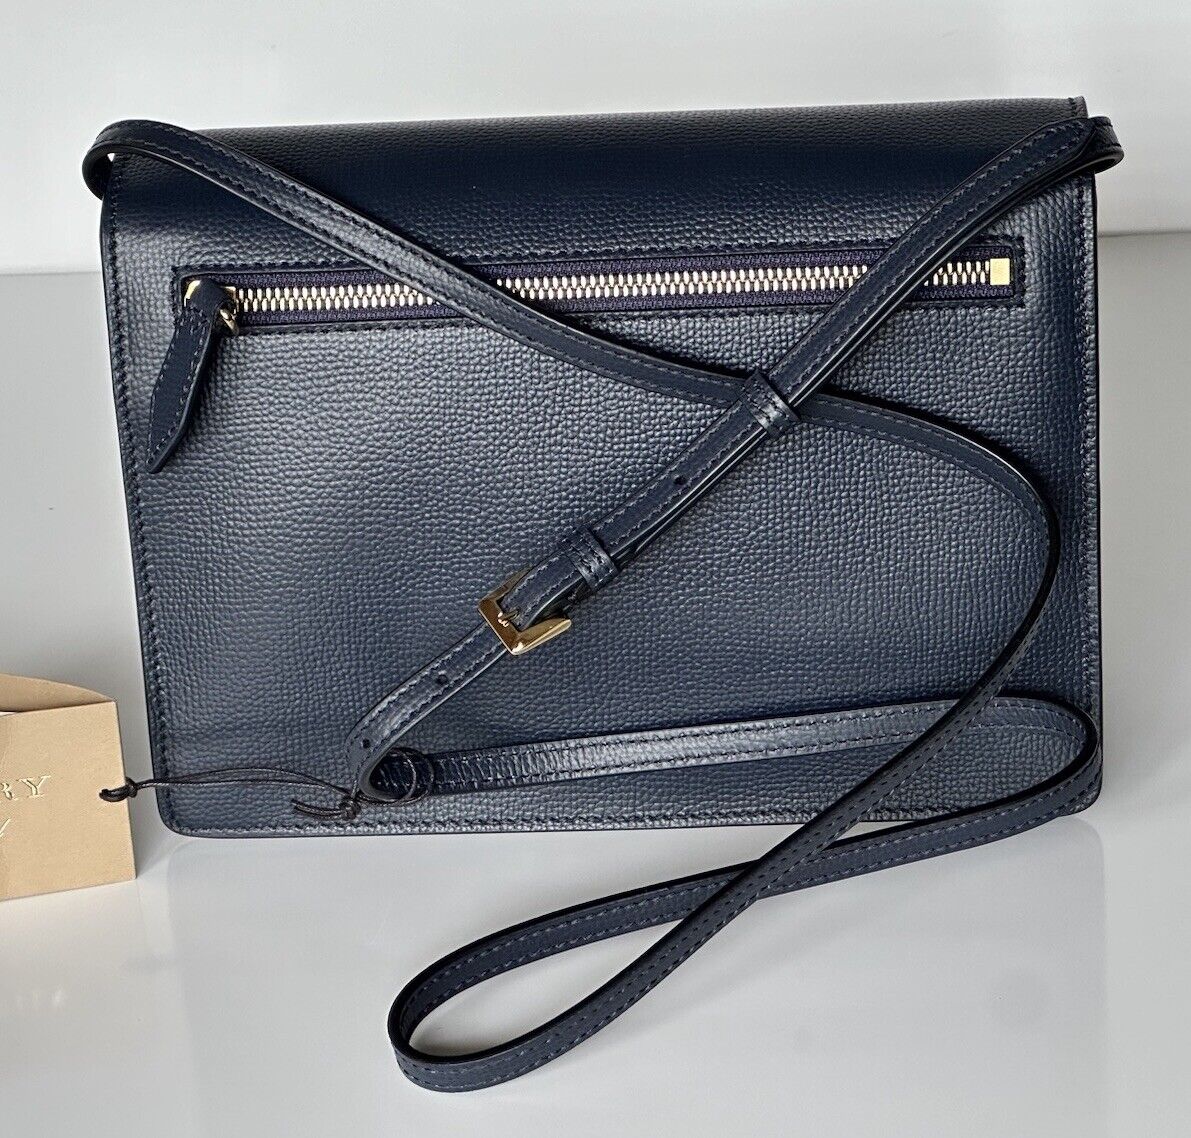 NWT Burberry Small Macken House Check Derby Leather Cross Body Bag Blue 39972051